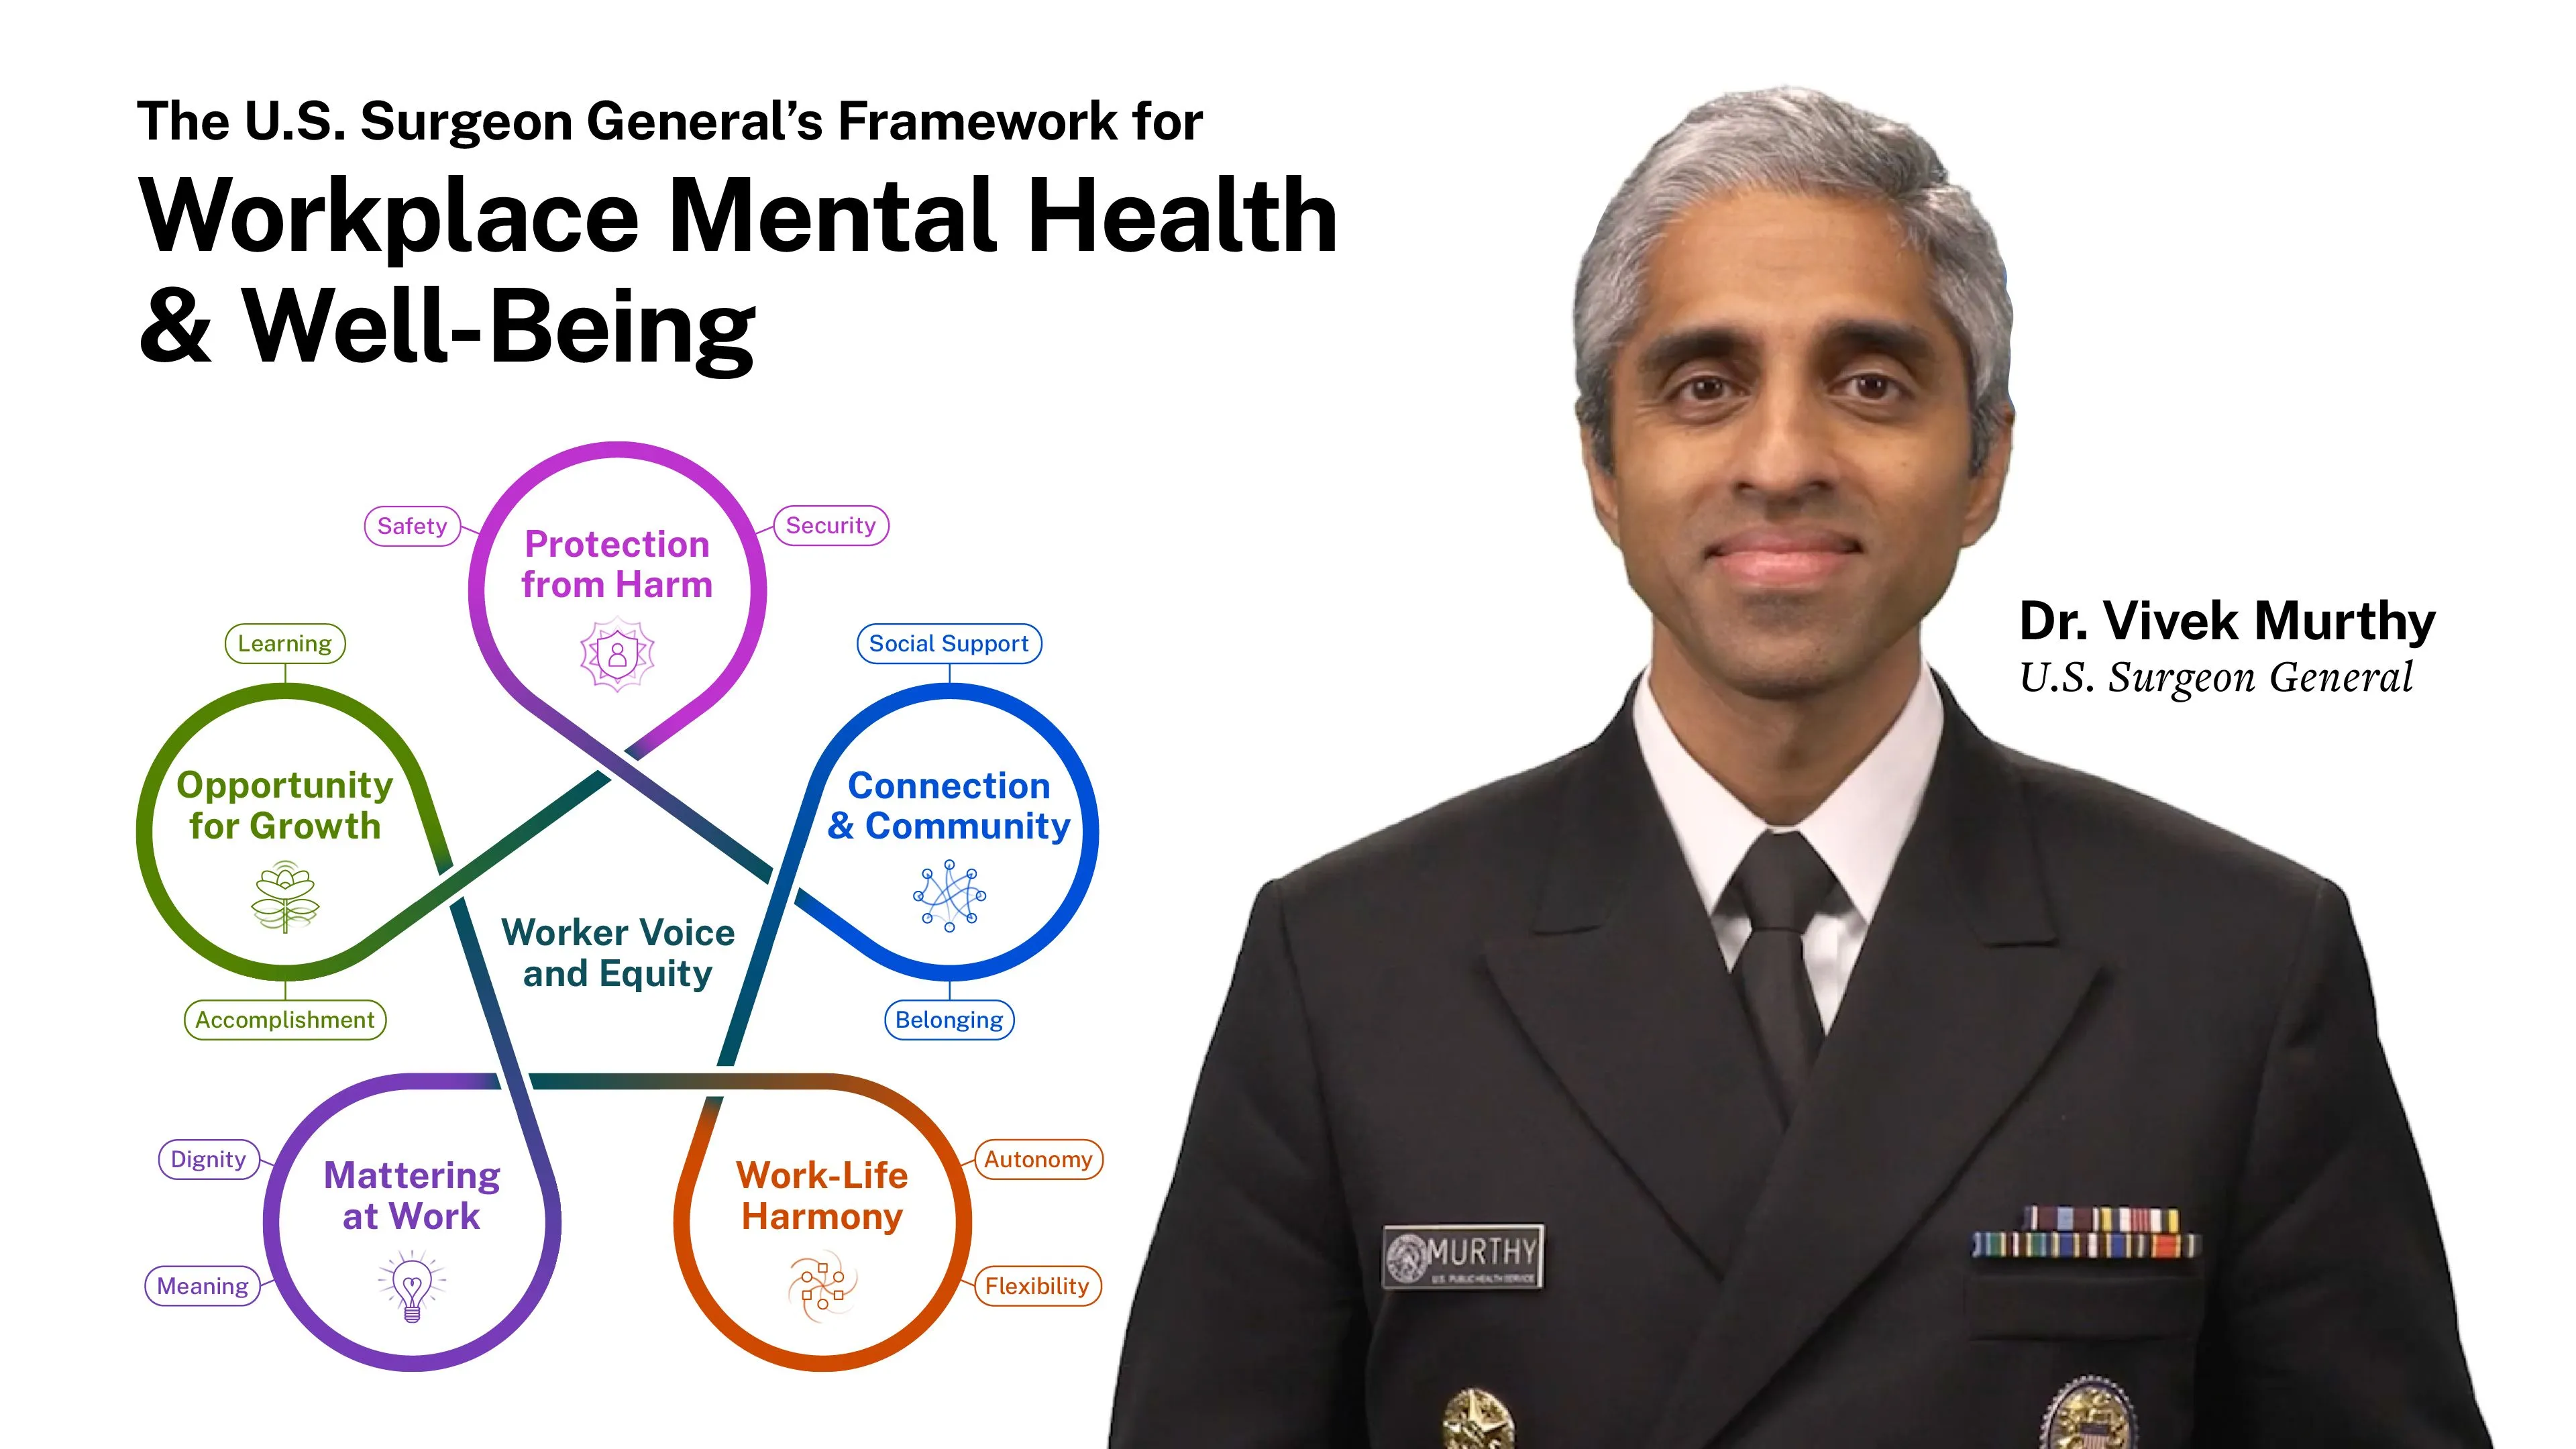 Five essentials for Workplace Mental Health and Well-Being, with Dr. Murthy in uniform smiling at the camera. There is an illustration of five essentials—Protection from Harm, Connection and Community, Work-Life Harmony, Mattering at Work, Opportunity for Growth—in a circle with Worker Voice and Equity in the center